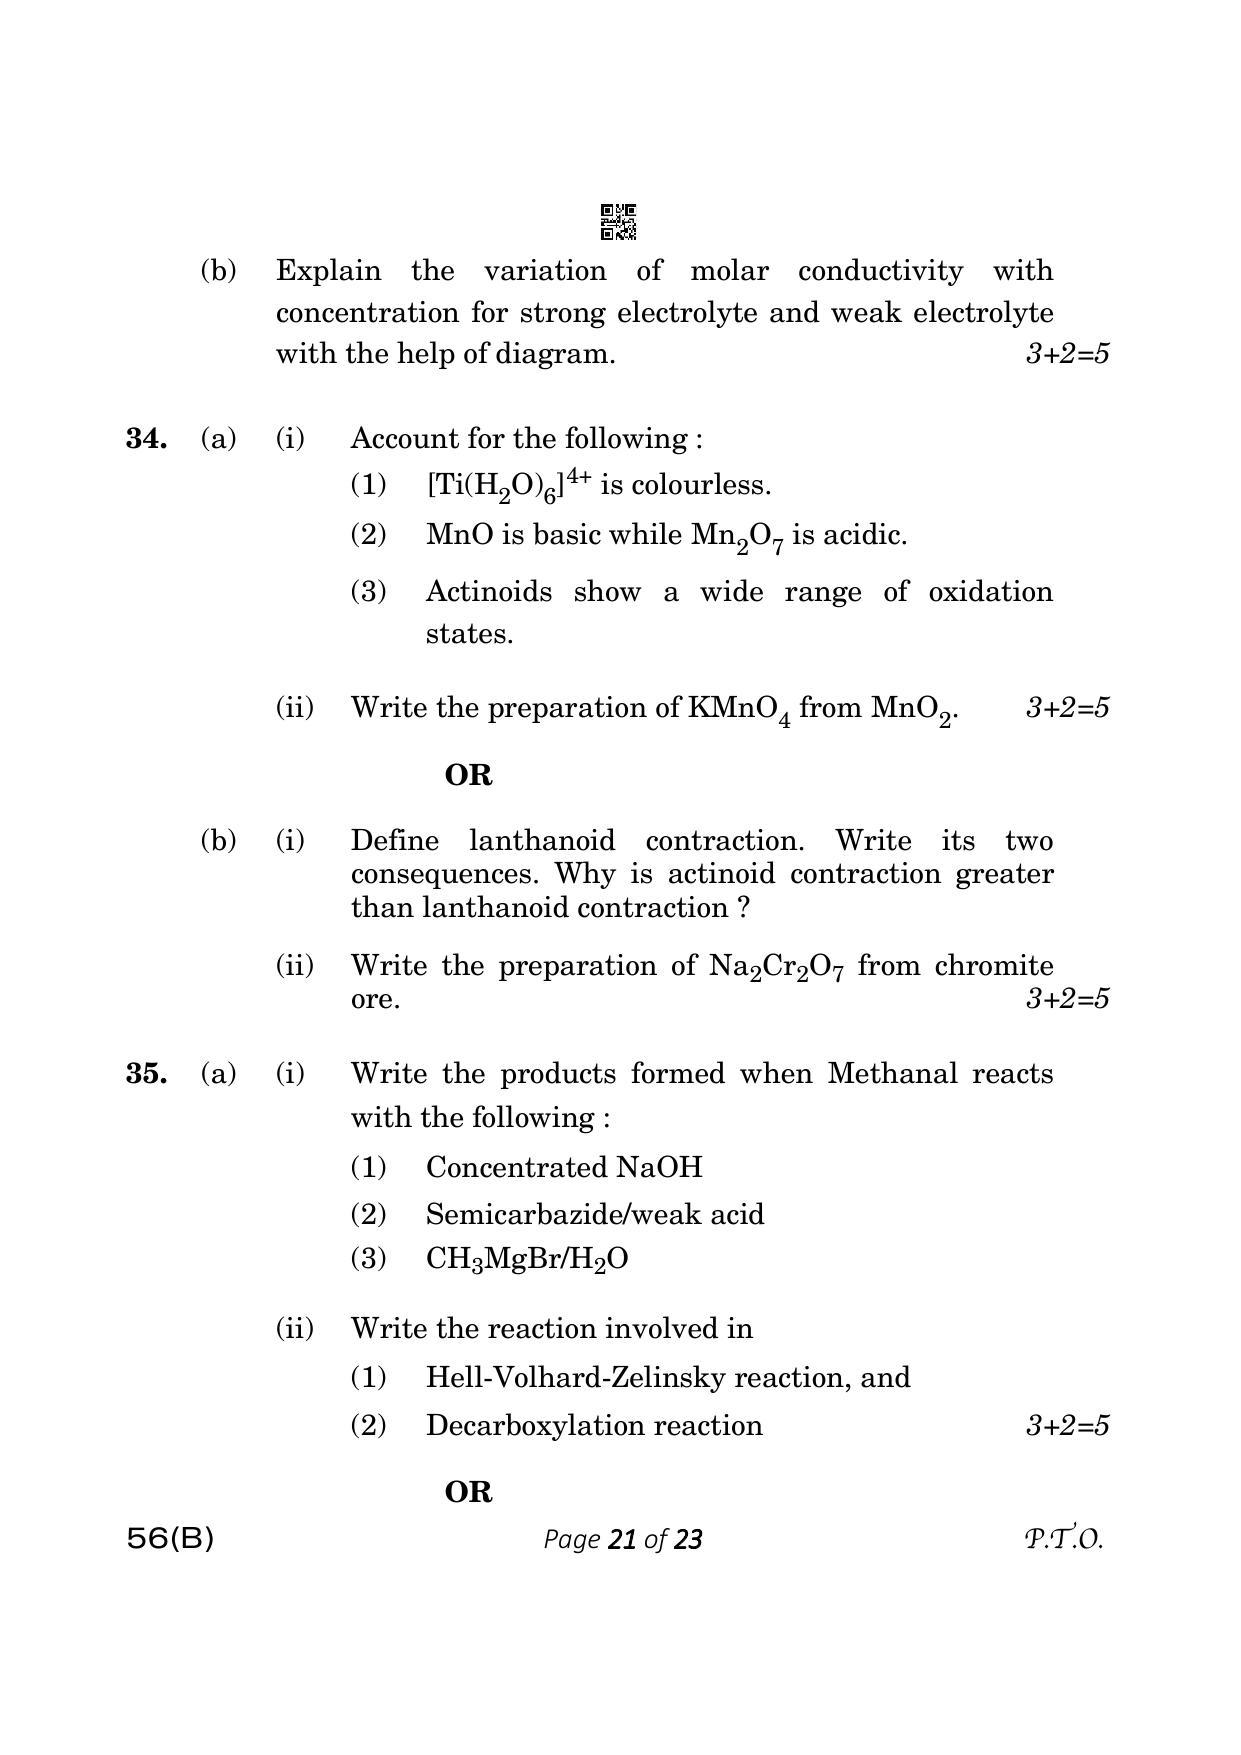 CBSE Class 12 56-B Chemistry 2023 (Compartment) Question Paper - Page 21